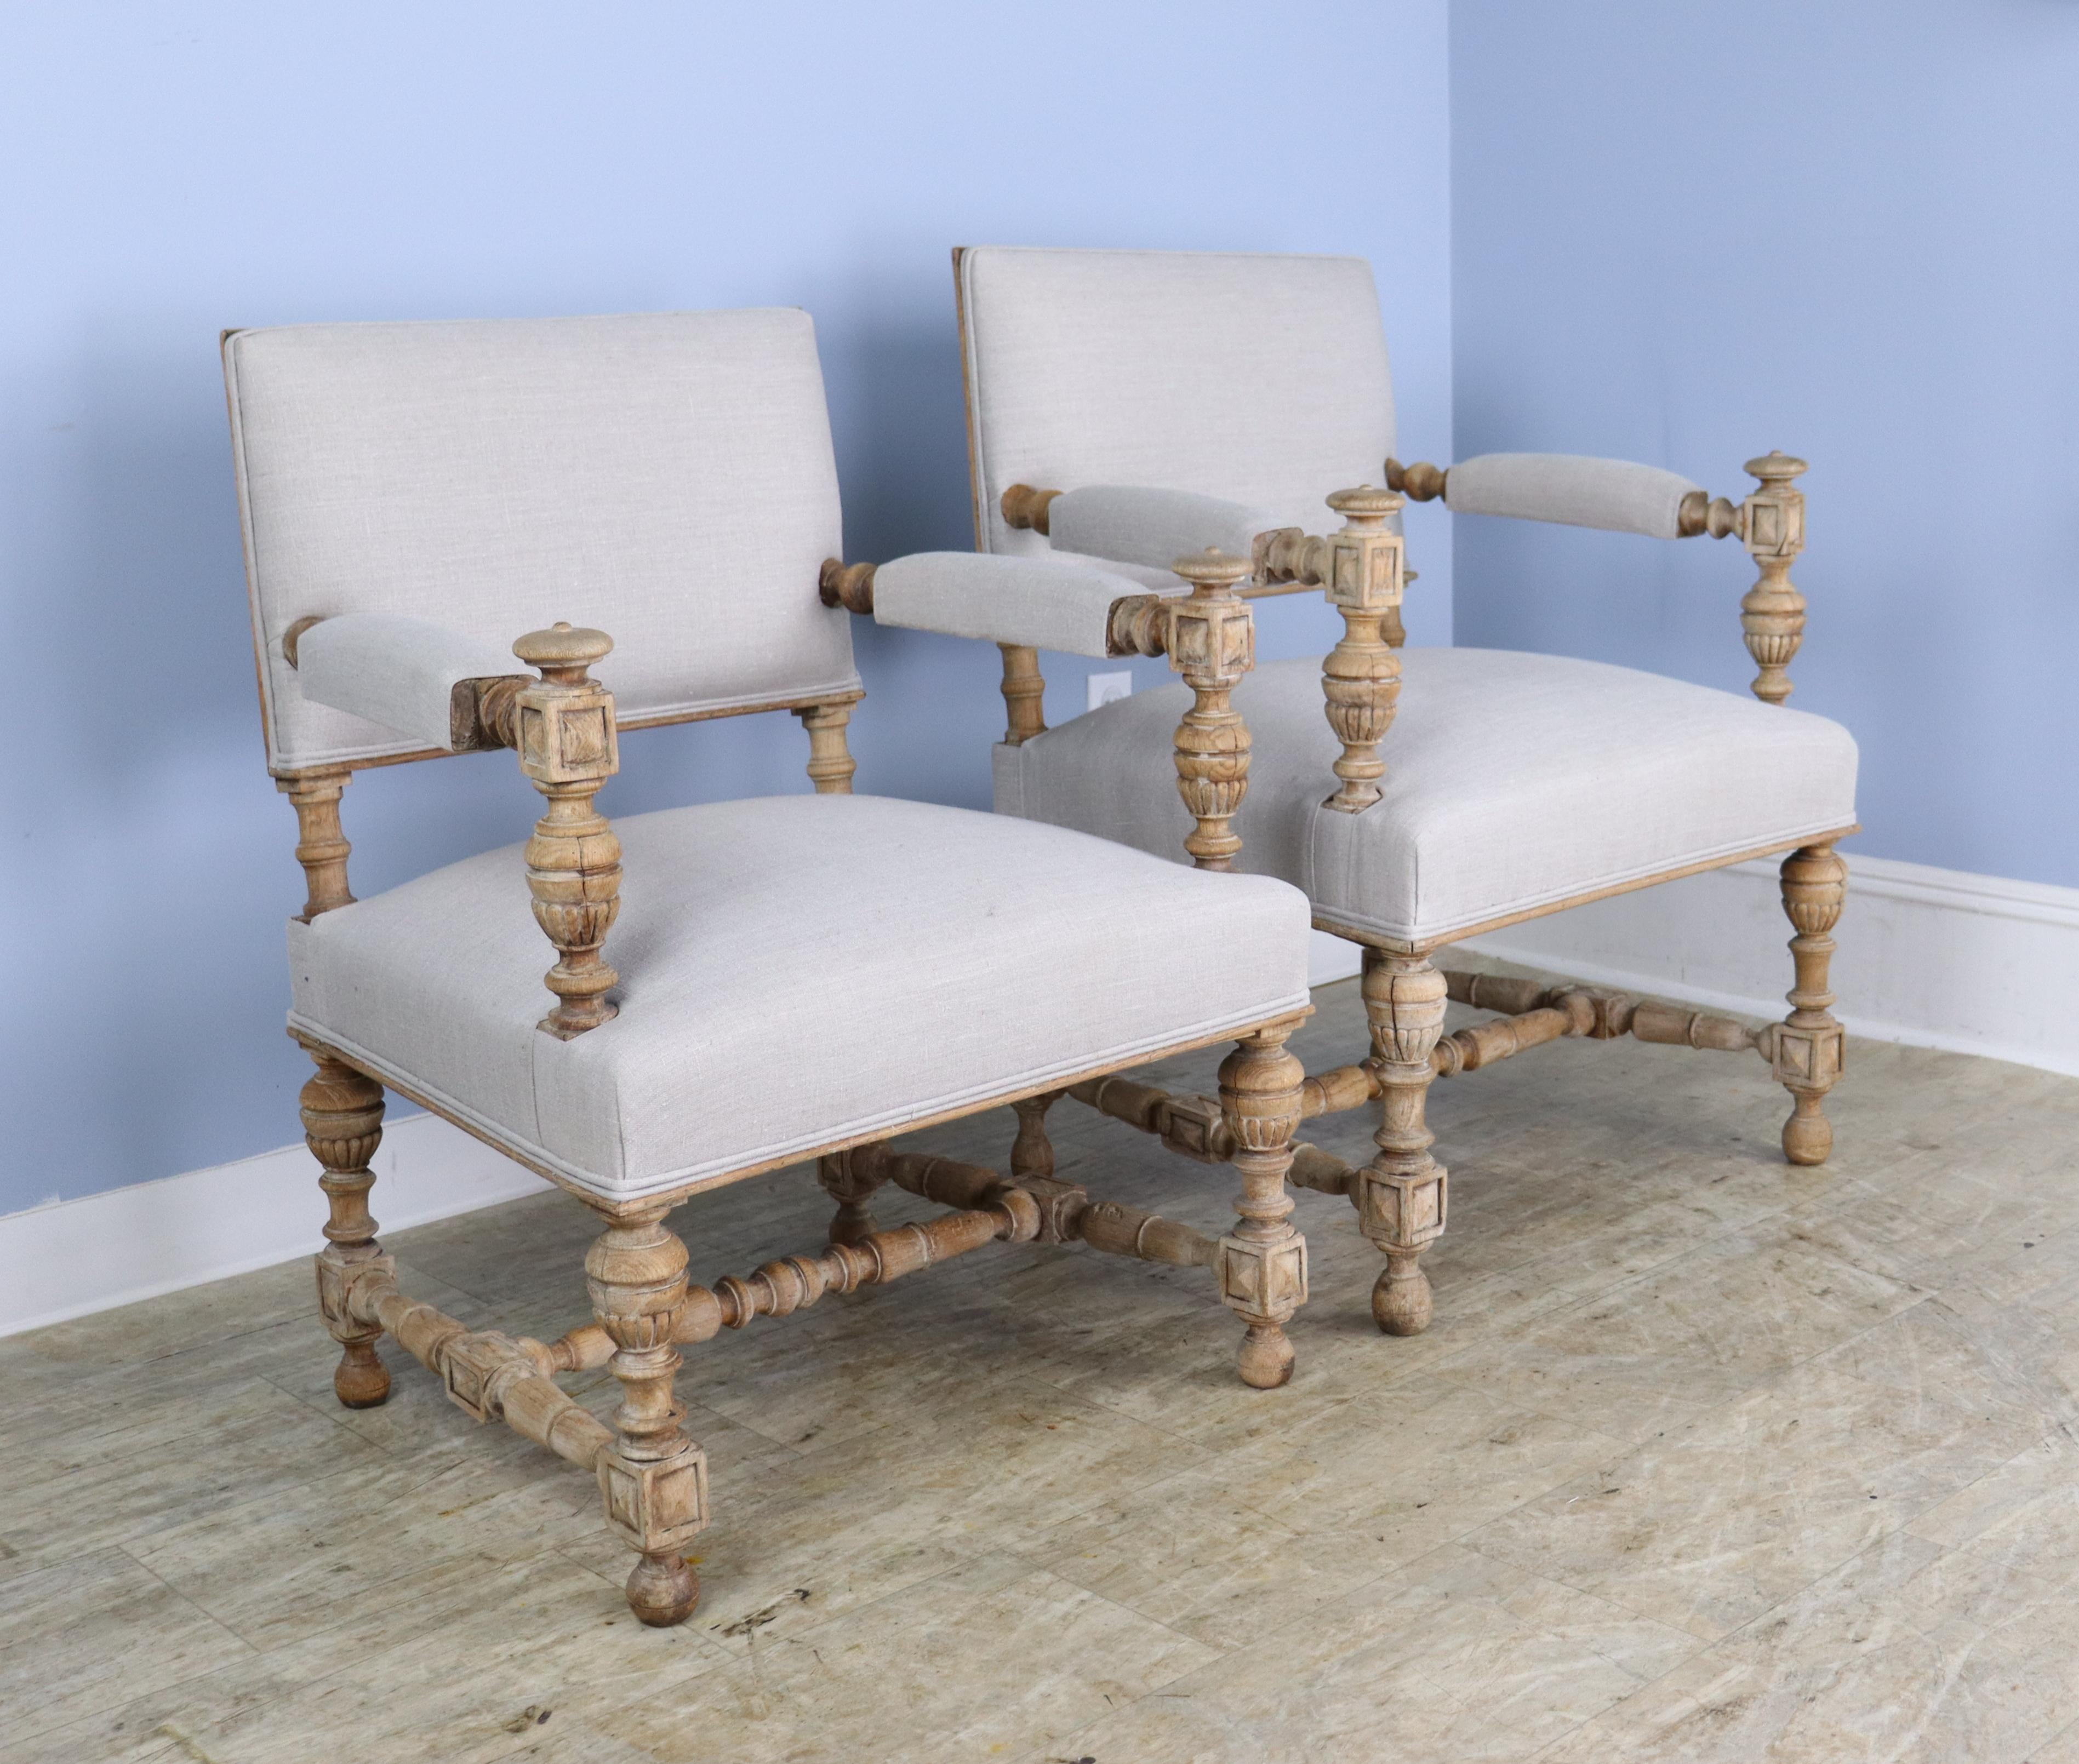 A gorgeous pair of his and hers French oak armchairs, bleached and newly upholstered in cream linen for a clean, modern look.  The formality of the intricate turnings and carvings is downplayed by the bleaching and gives the pair a beachy, country